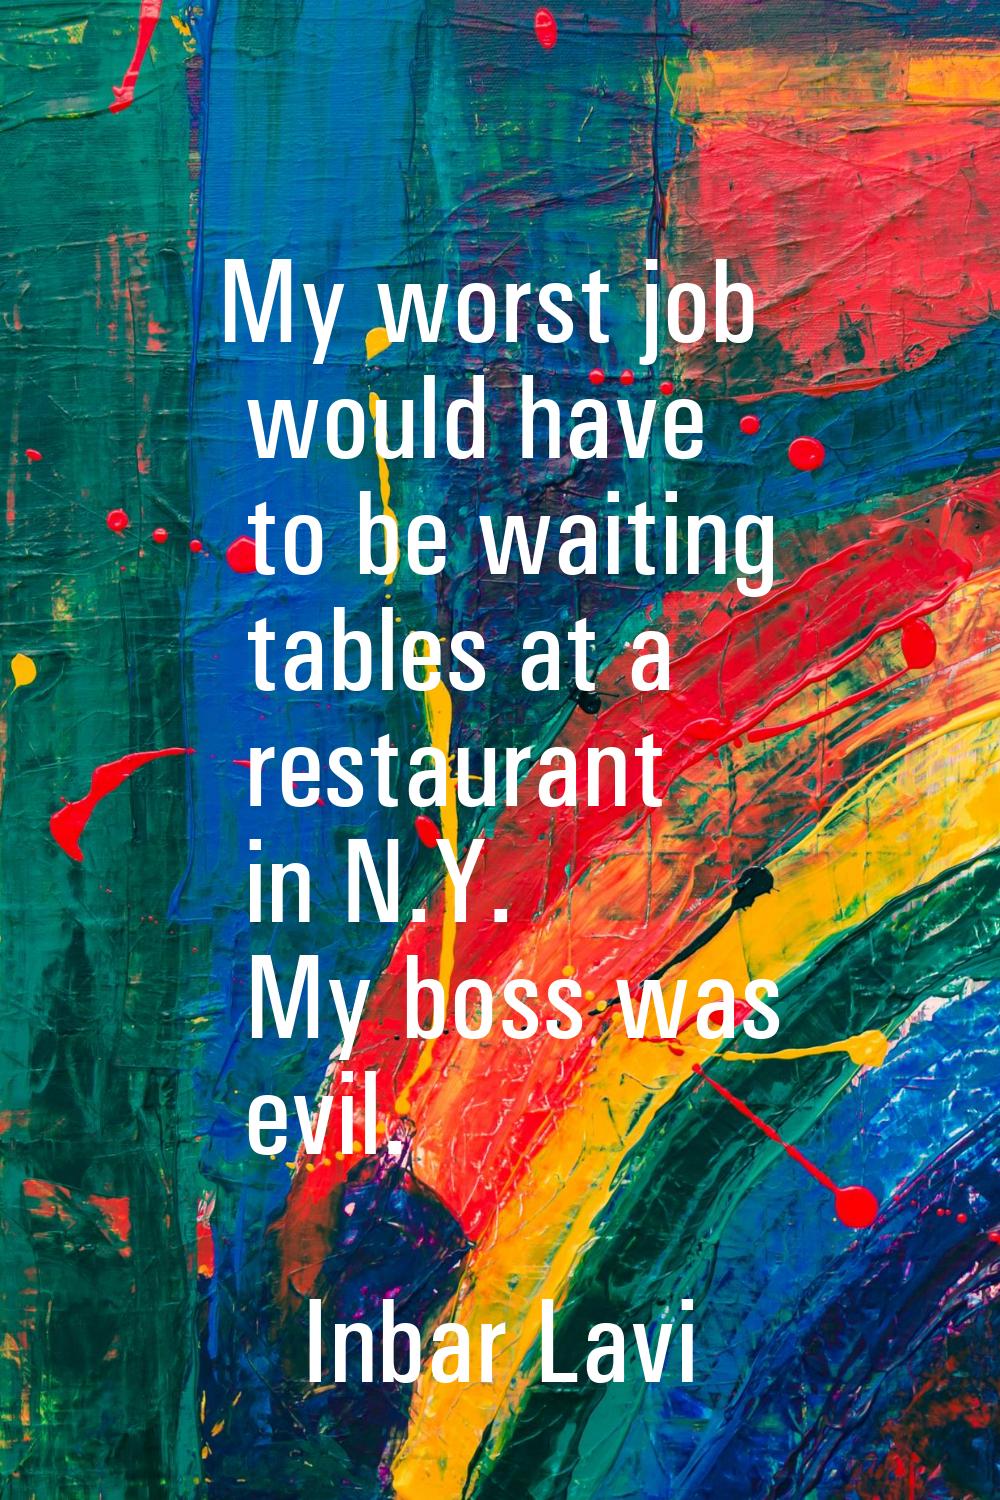 My worst job would have to be waiting tables at a restaurant in N.Y. My boss was evil.